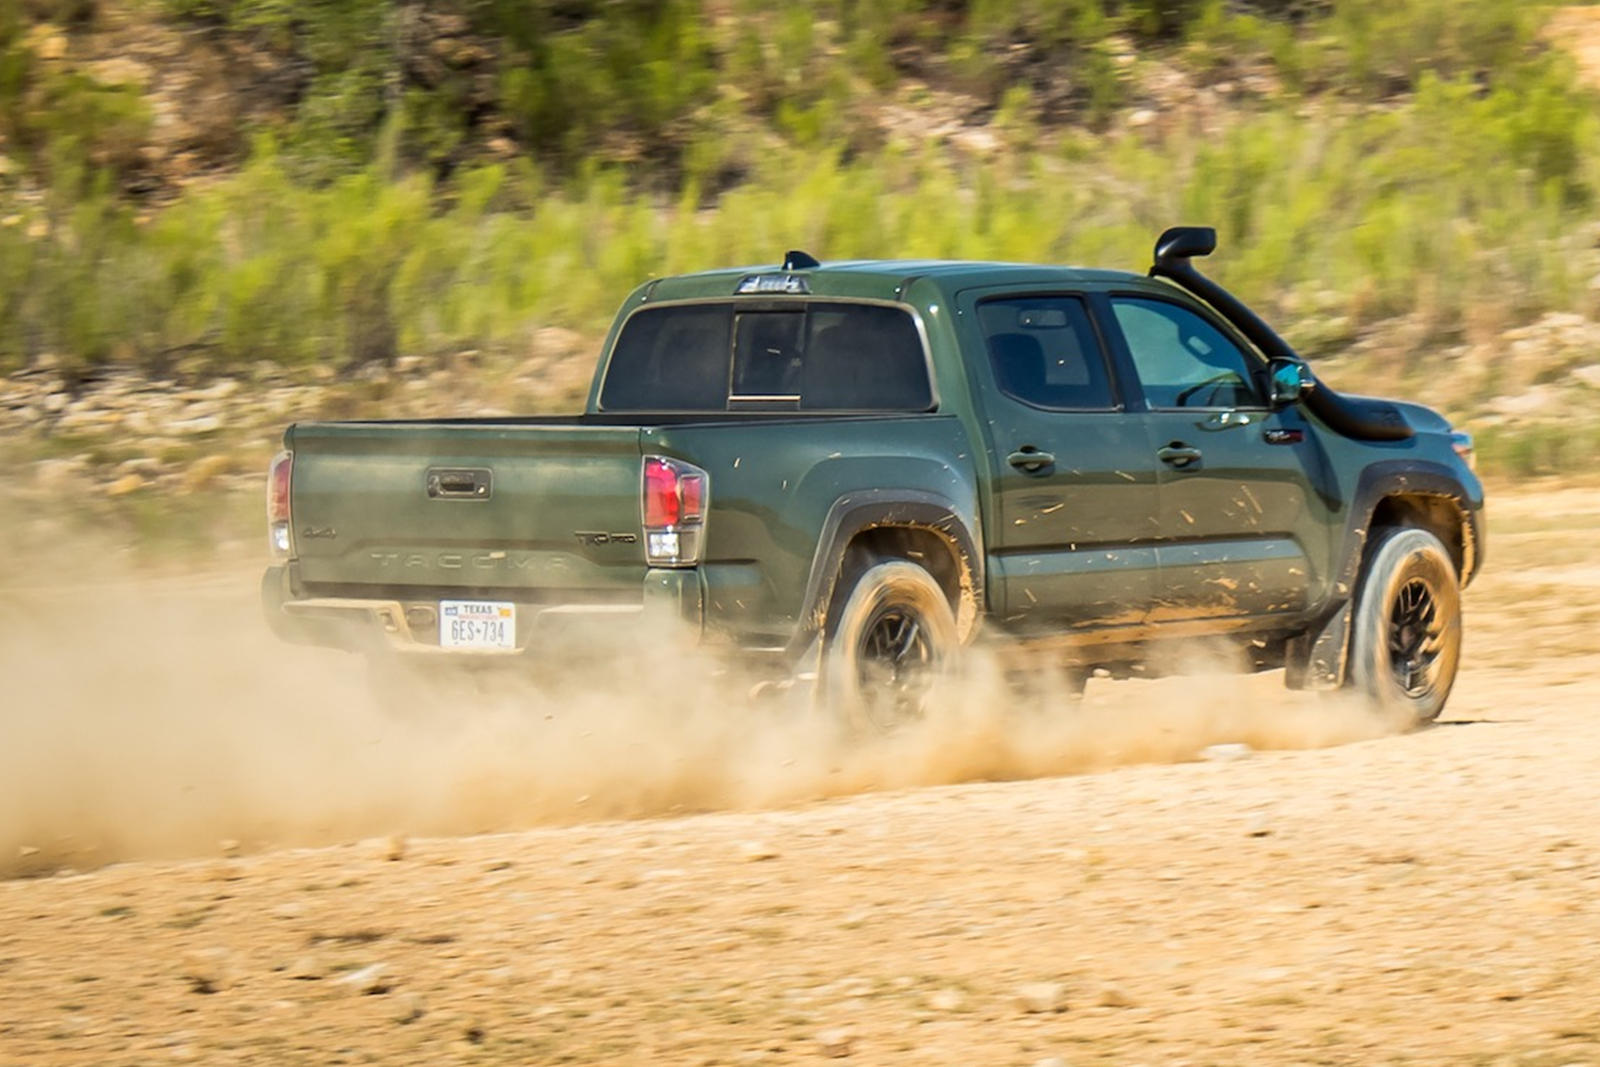 toyota-publishes-2020-tacoma-pricing-guide-tacoma-trd-pro-costs-1-000